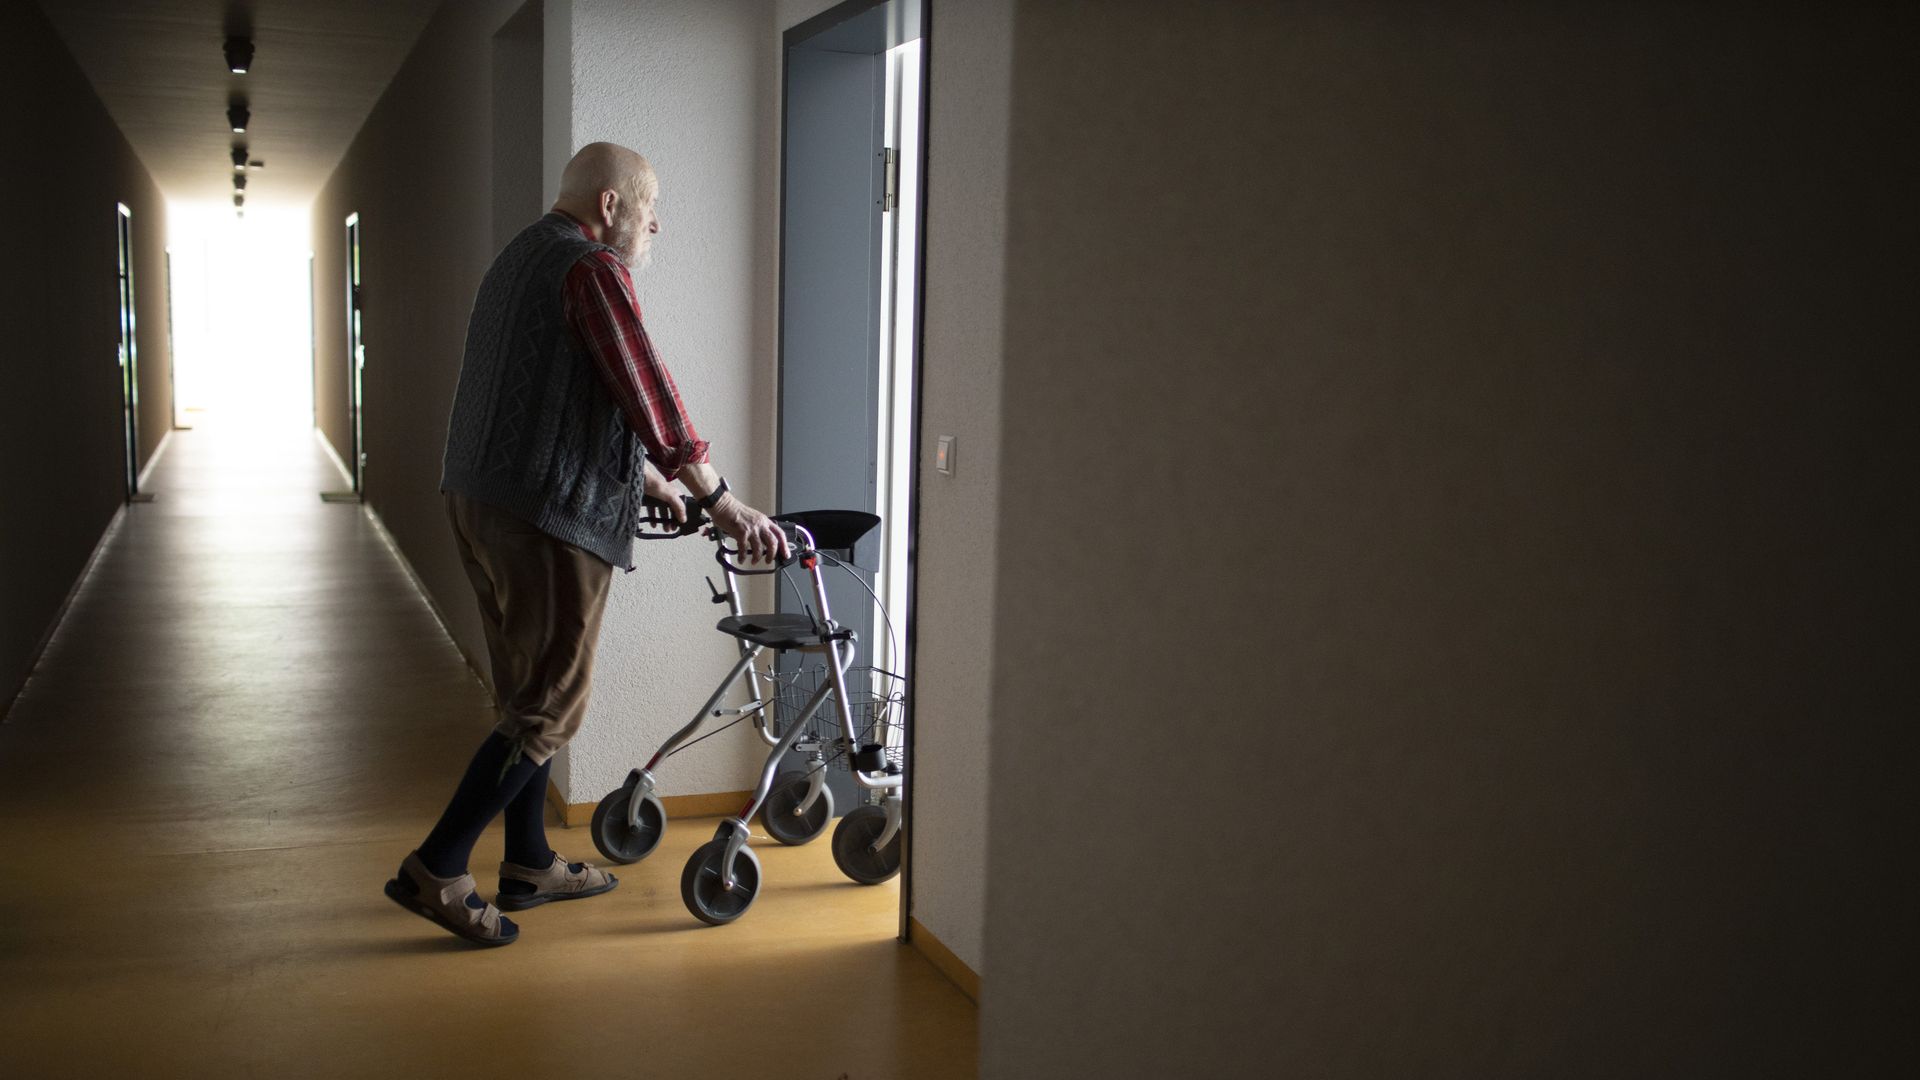 A person uses a walker to navigate a doorway.